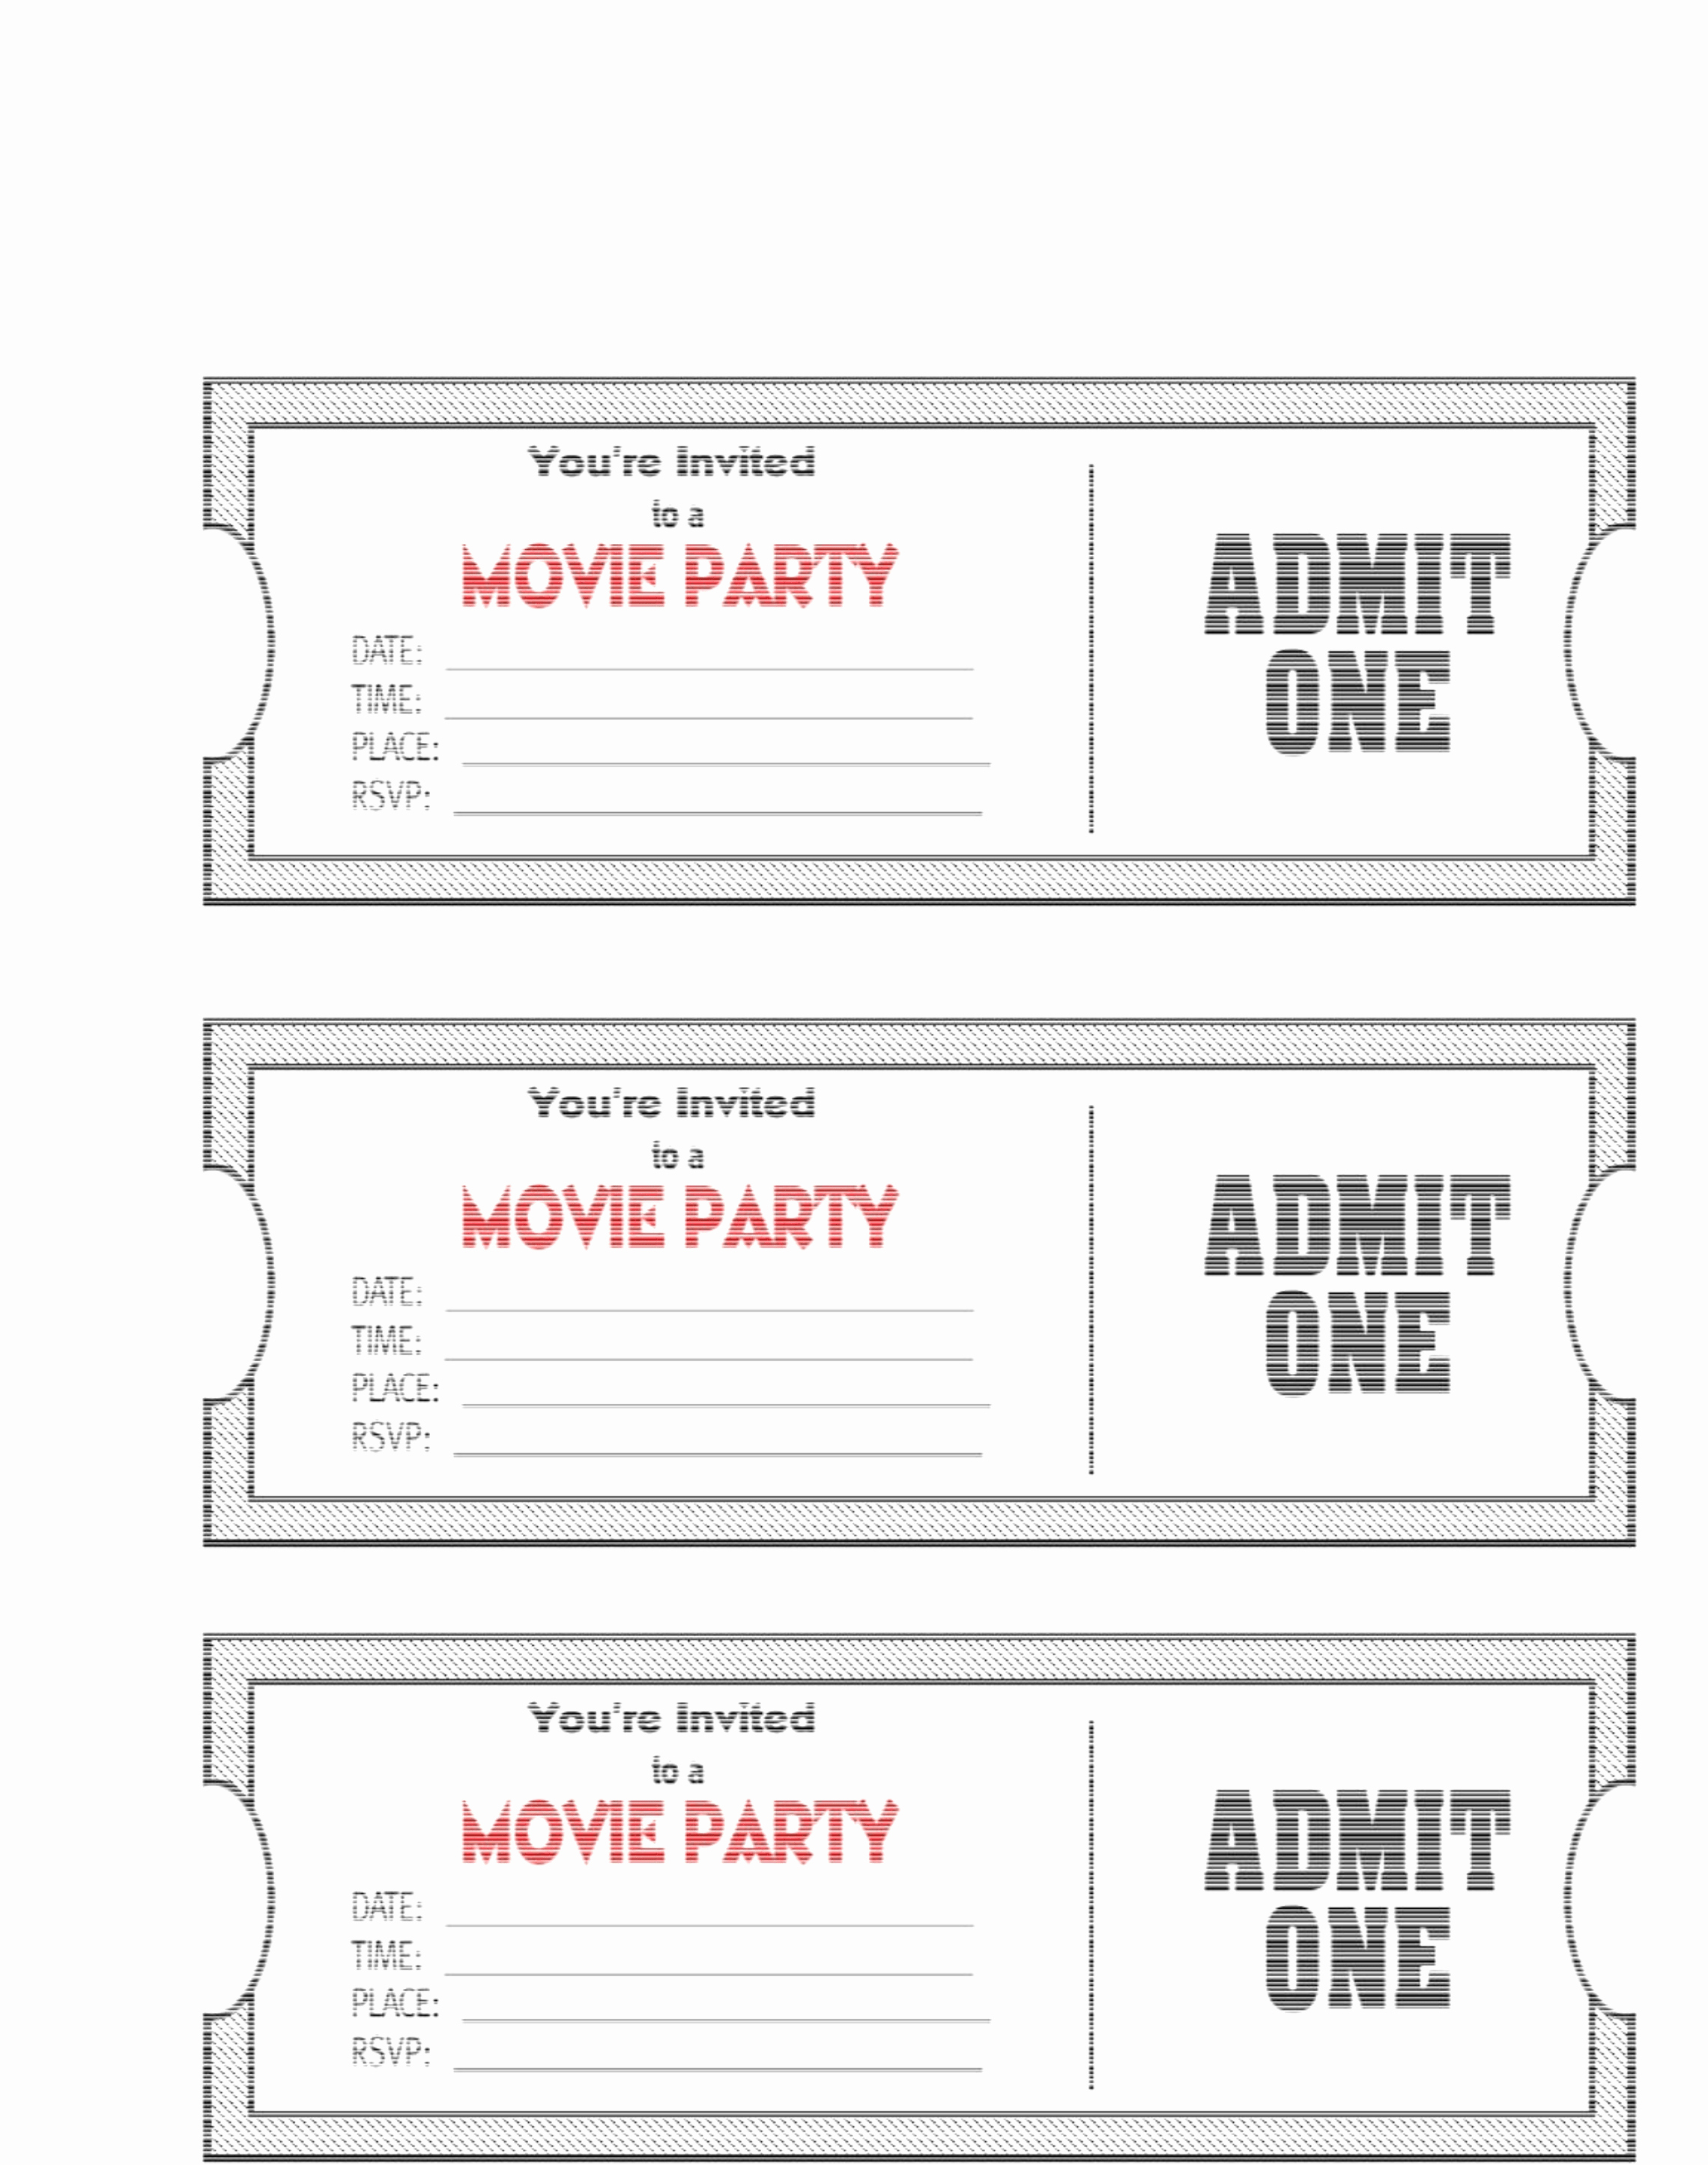 Admit One Ticket Invitation Template Awesome Free Printable Movie Ticket Invitations